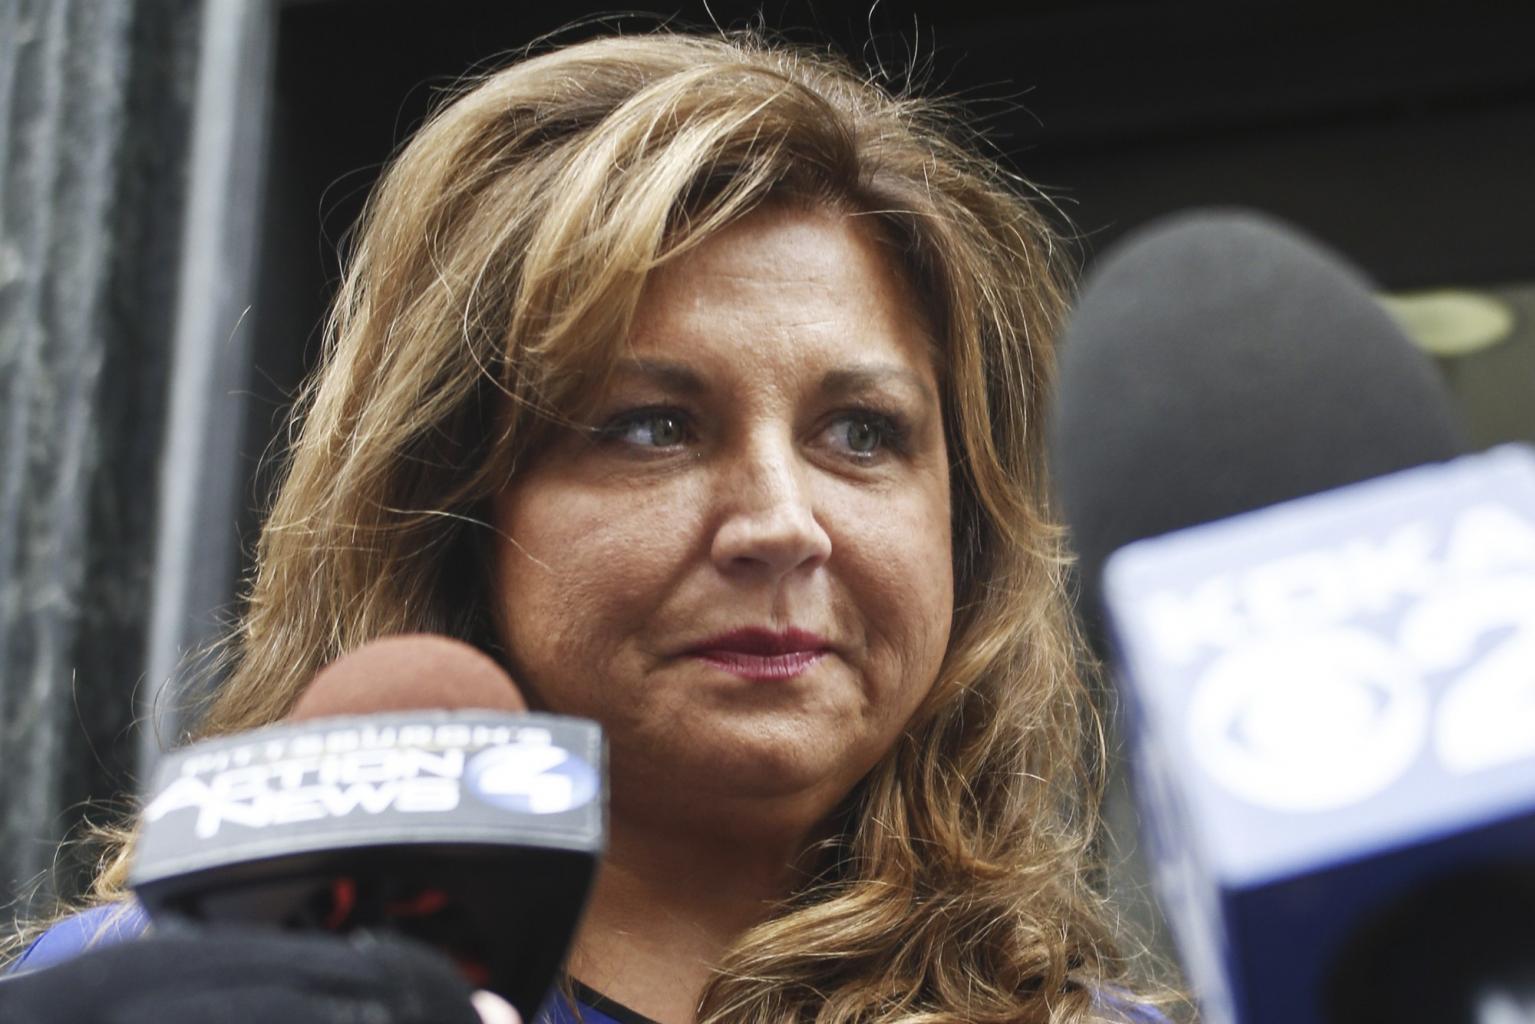 Abby Lee Miller Reports to Prison Where She Will Serve a 366-Day Sentence for BankruptcyÂ Fraud